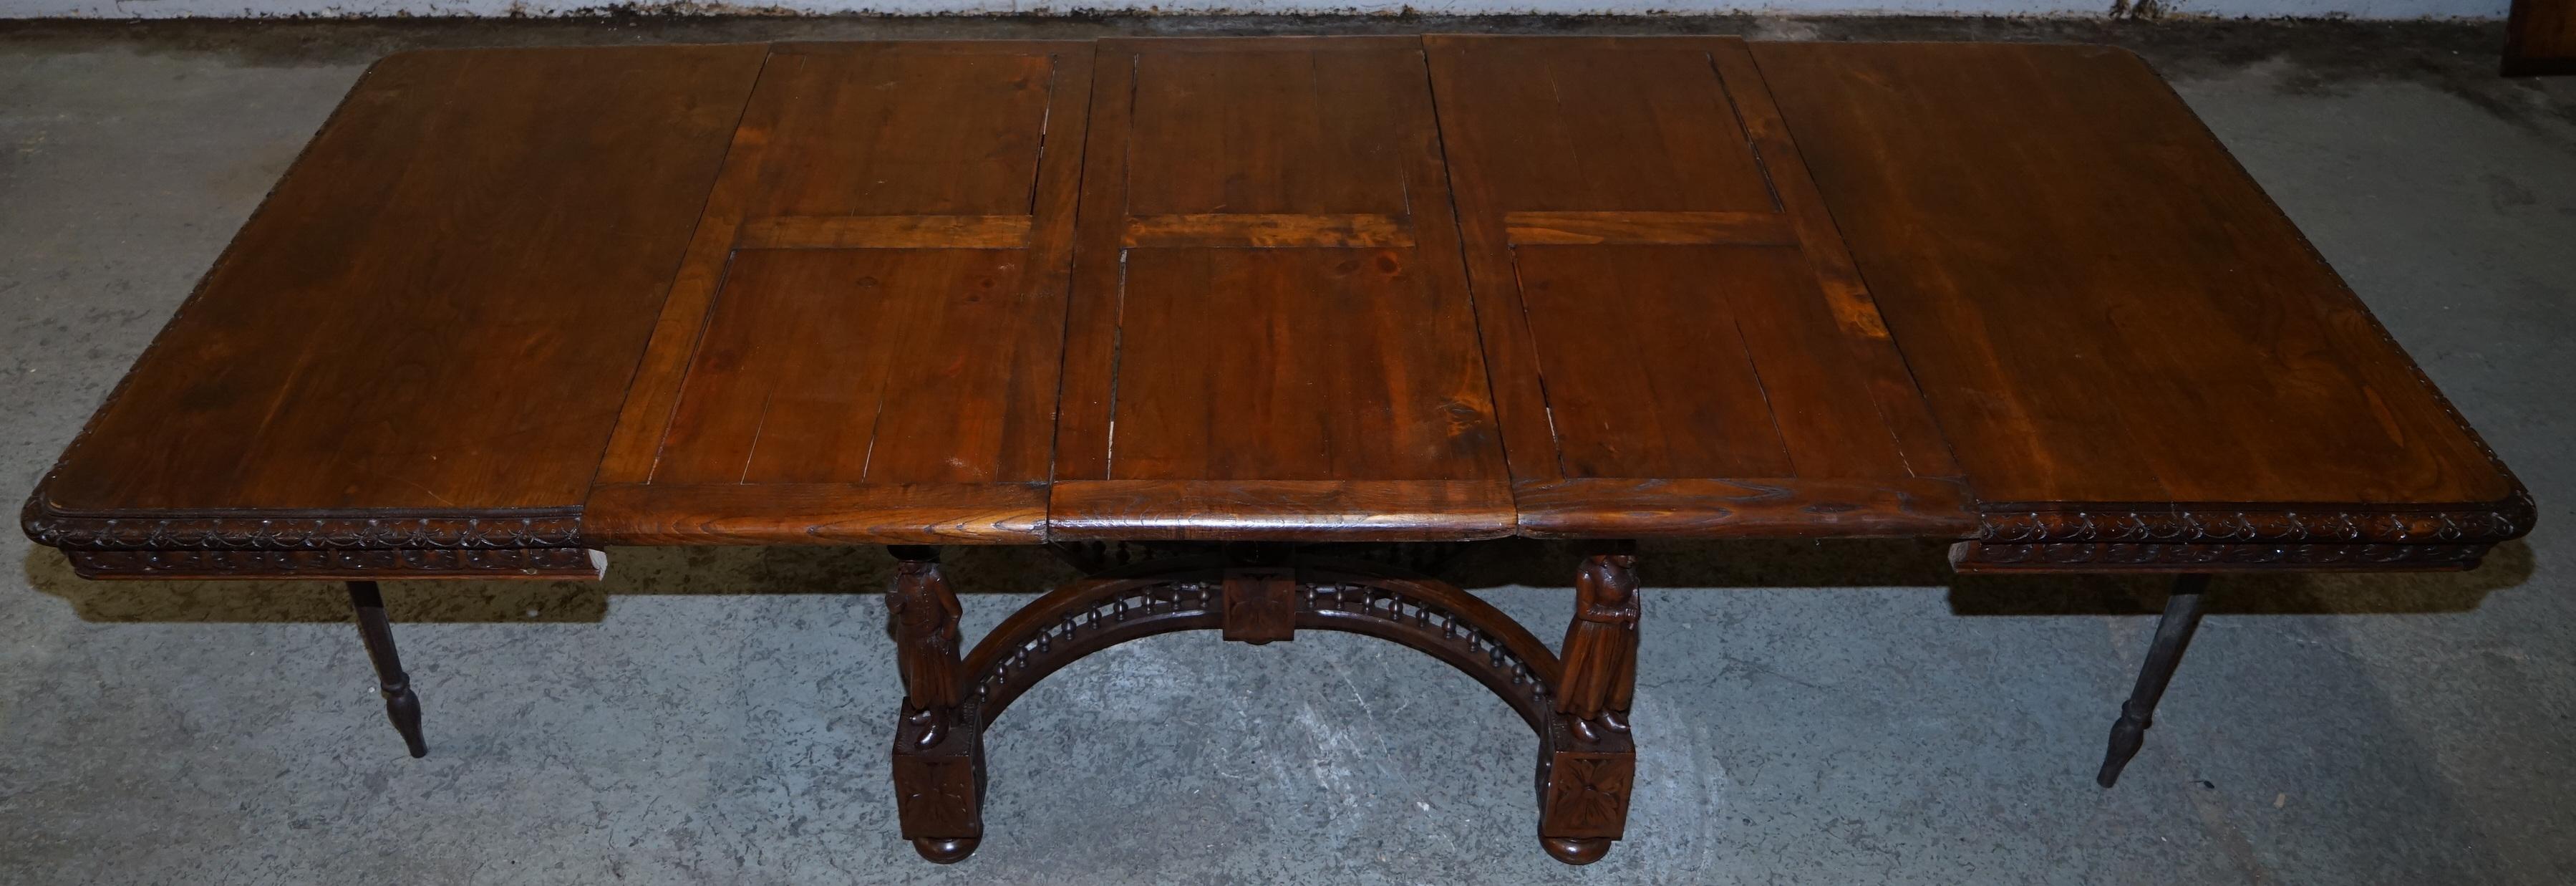 Rare circa 1880 French Brittany Hand Carved Chestnut Wood Extending Dining Table 11